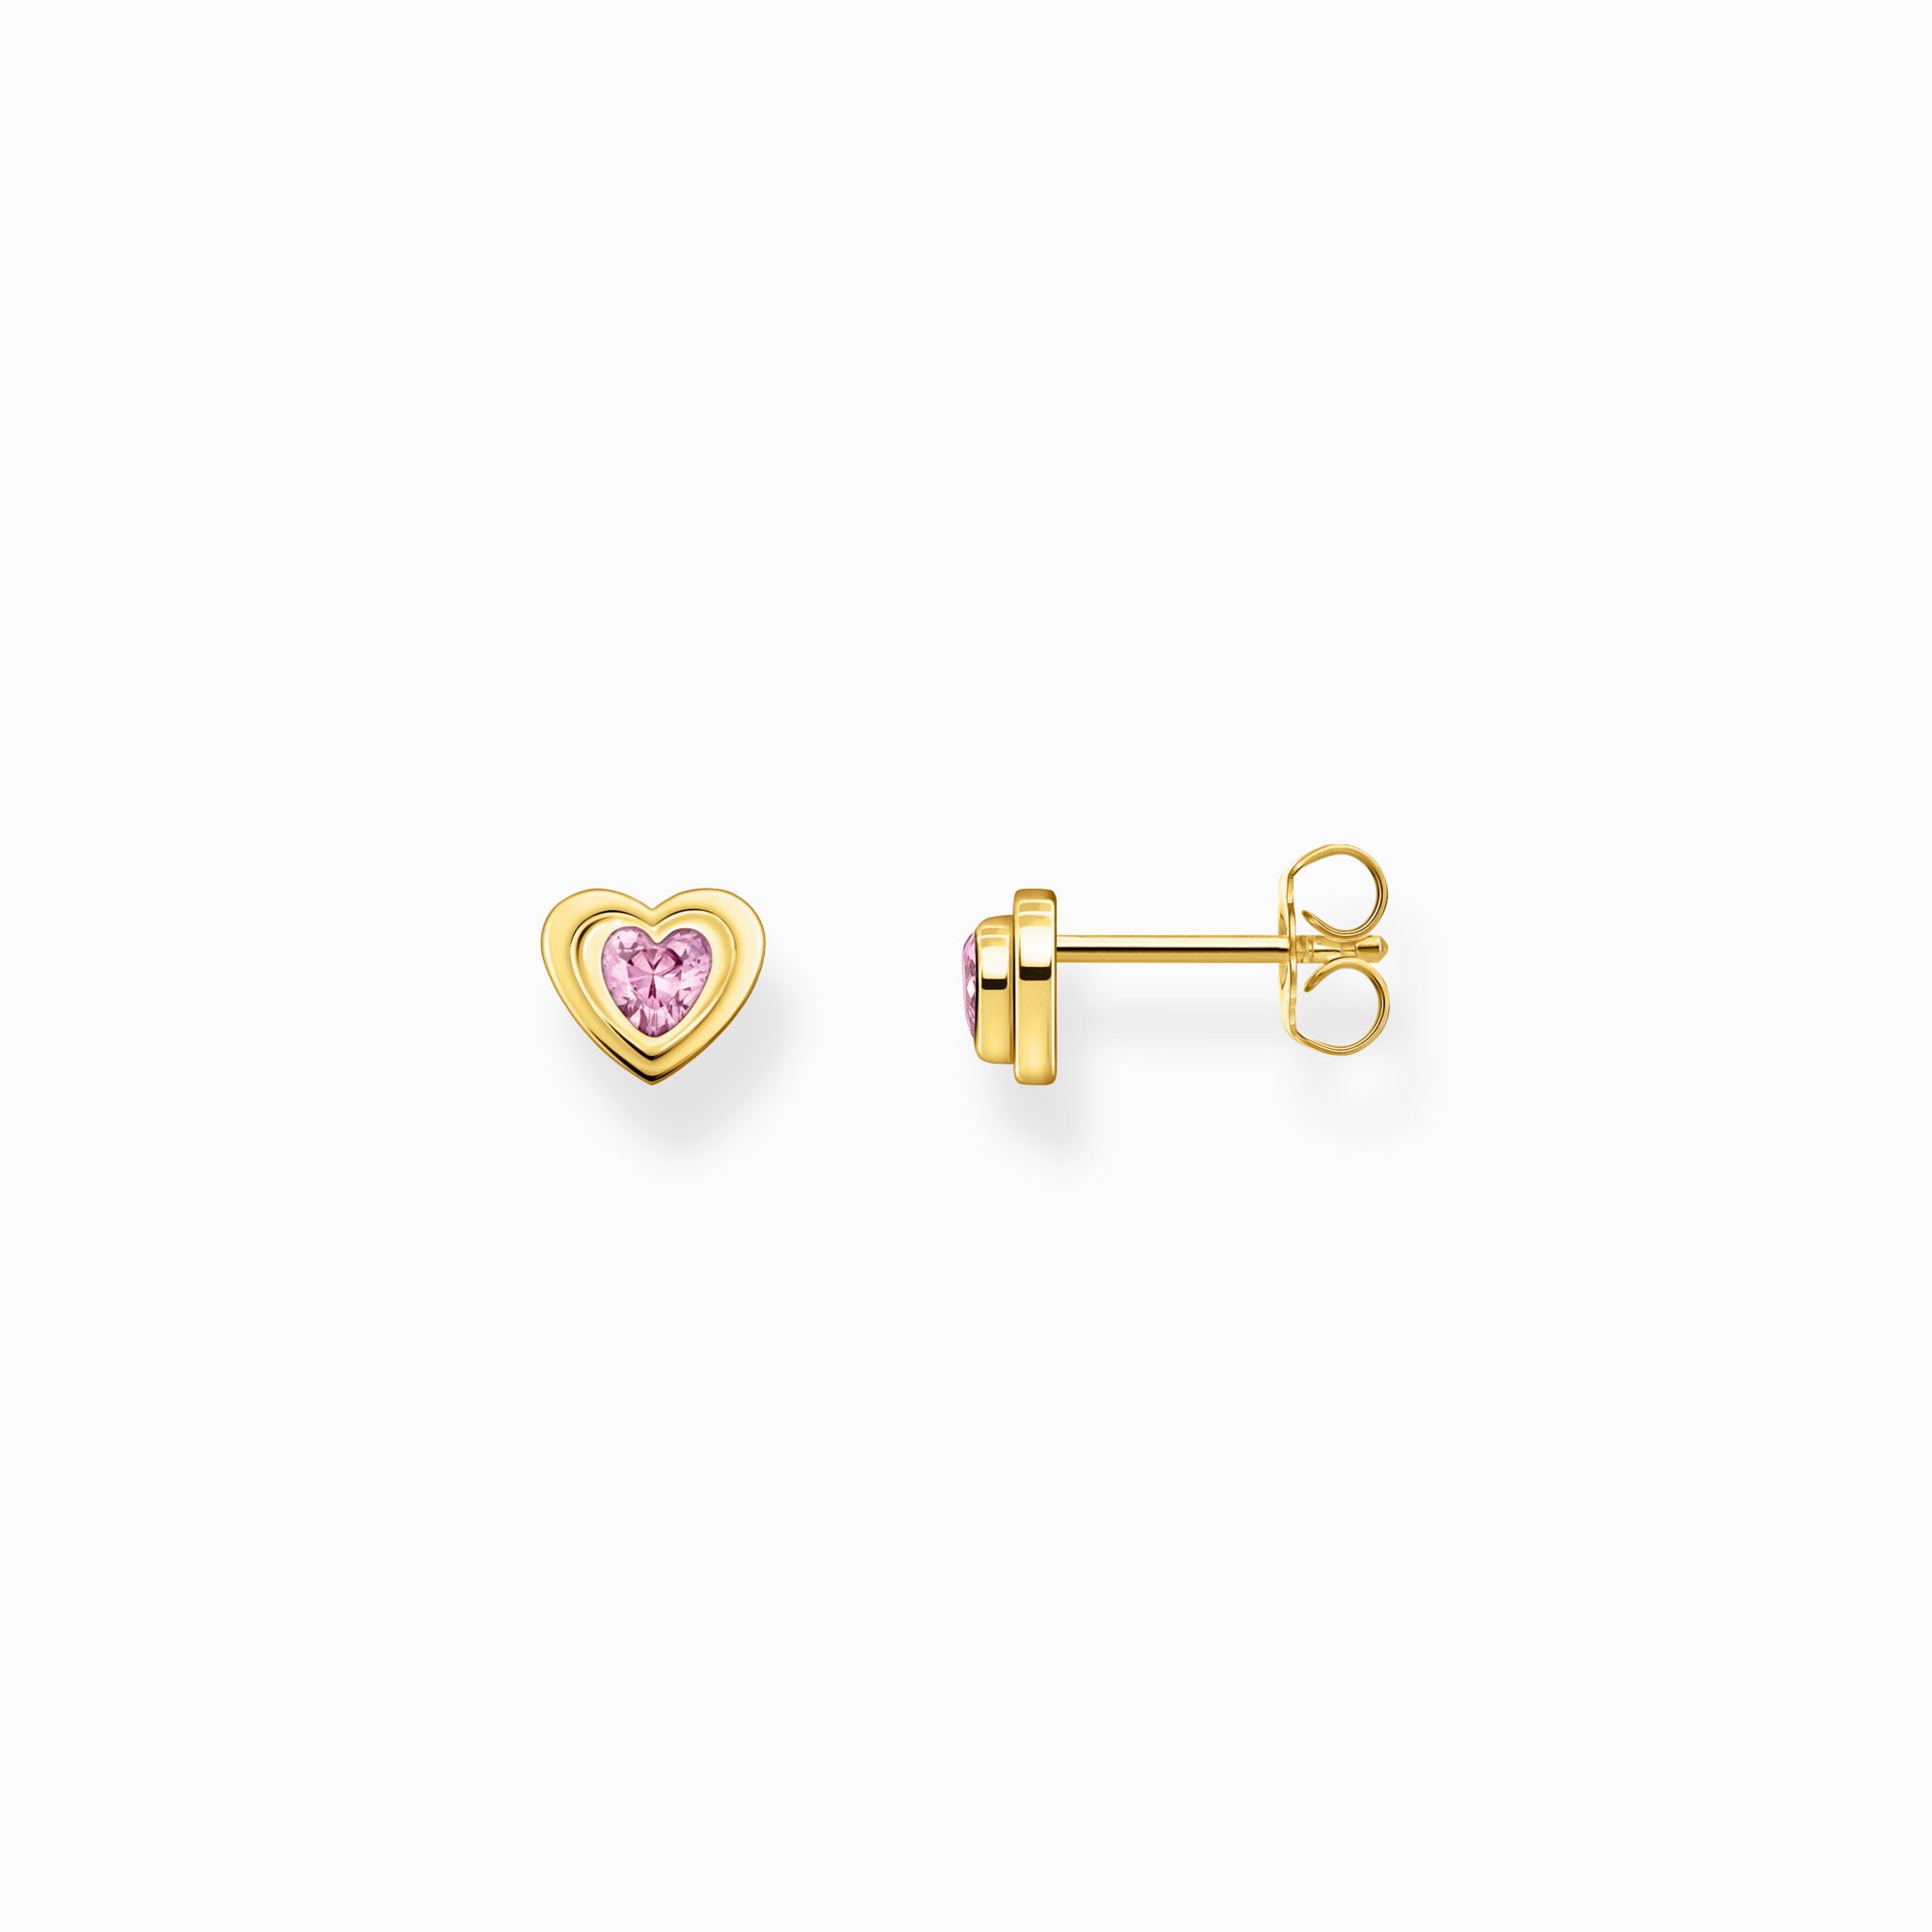 Yellow-gold plated ear studs in heart-shape with pink zirconia from the  collection in the THOMAS SABO online store